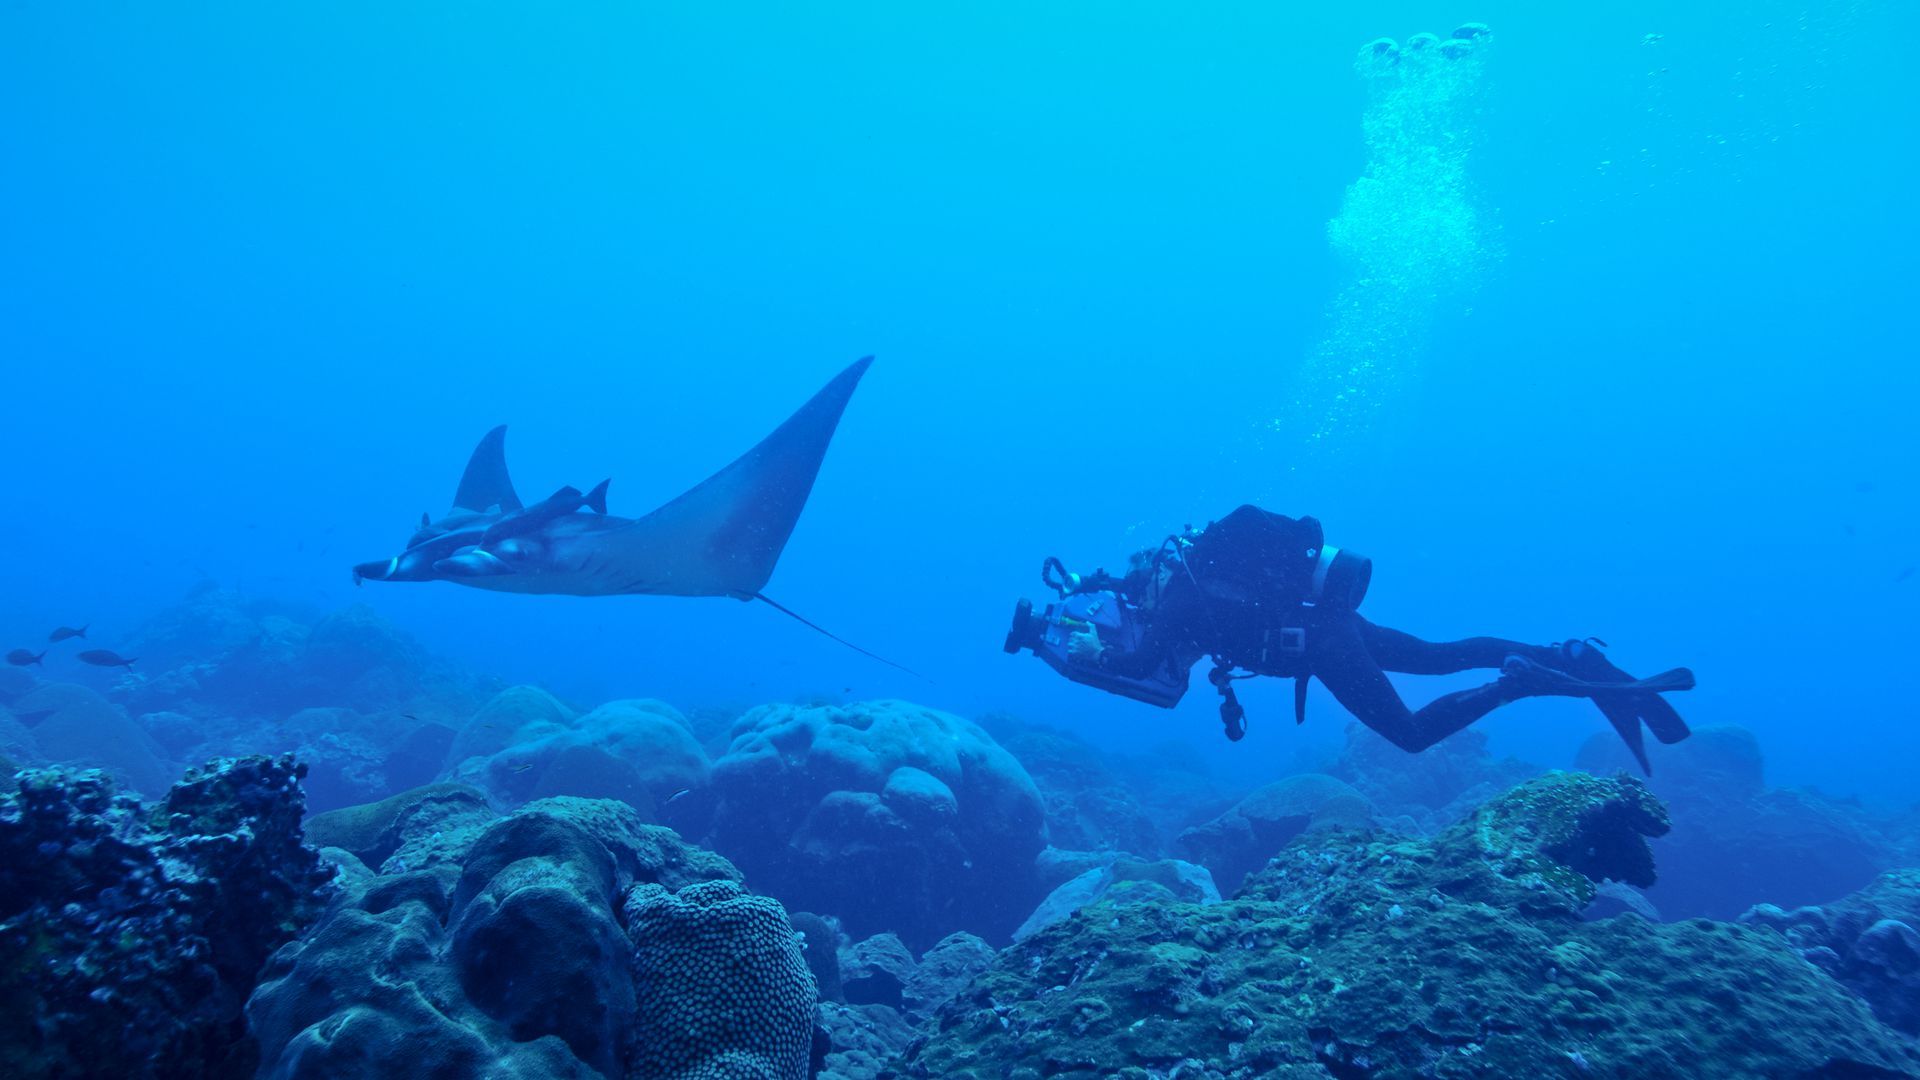 Diver observing a juvenile manta ray in the Gulf of Mexico.